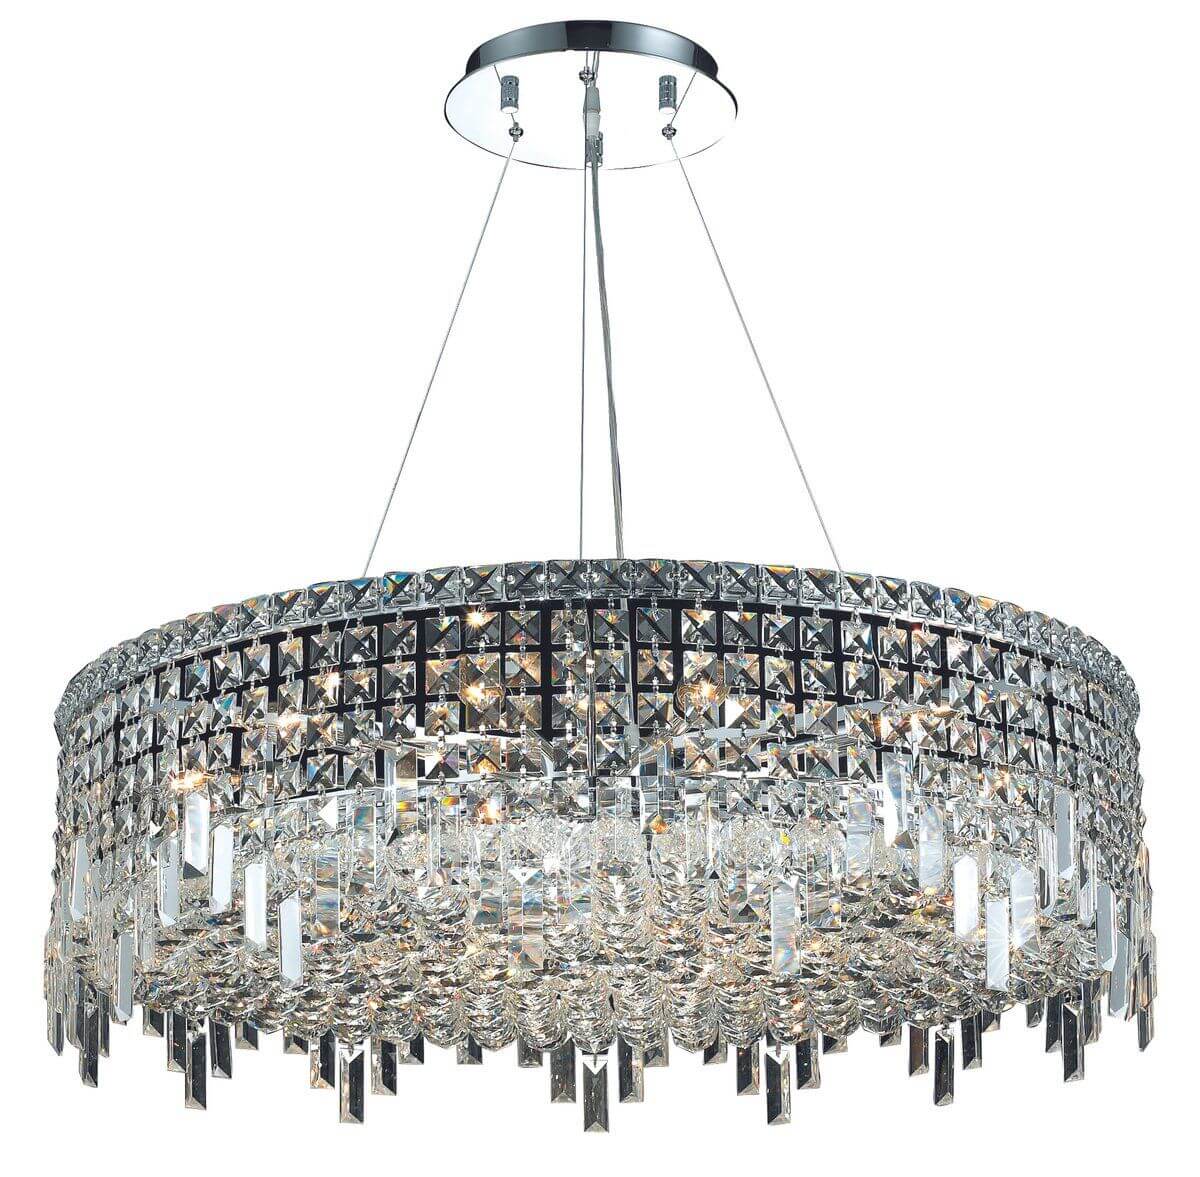 Elegant Lighting V2031D32C/RC Maxime 18 Light 32 Inch Crystal Chandelier In Chrome With Royal Cut Clear Crystal